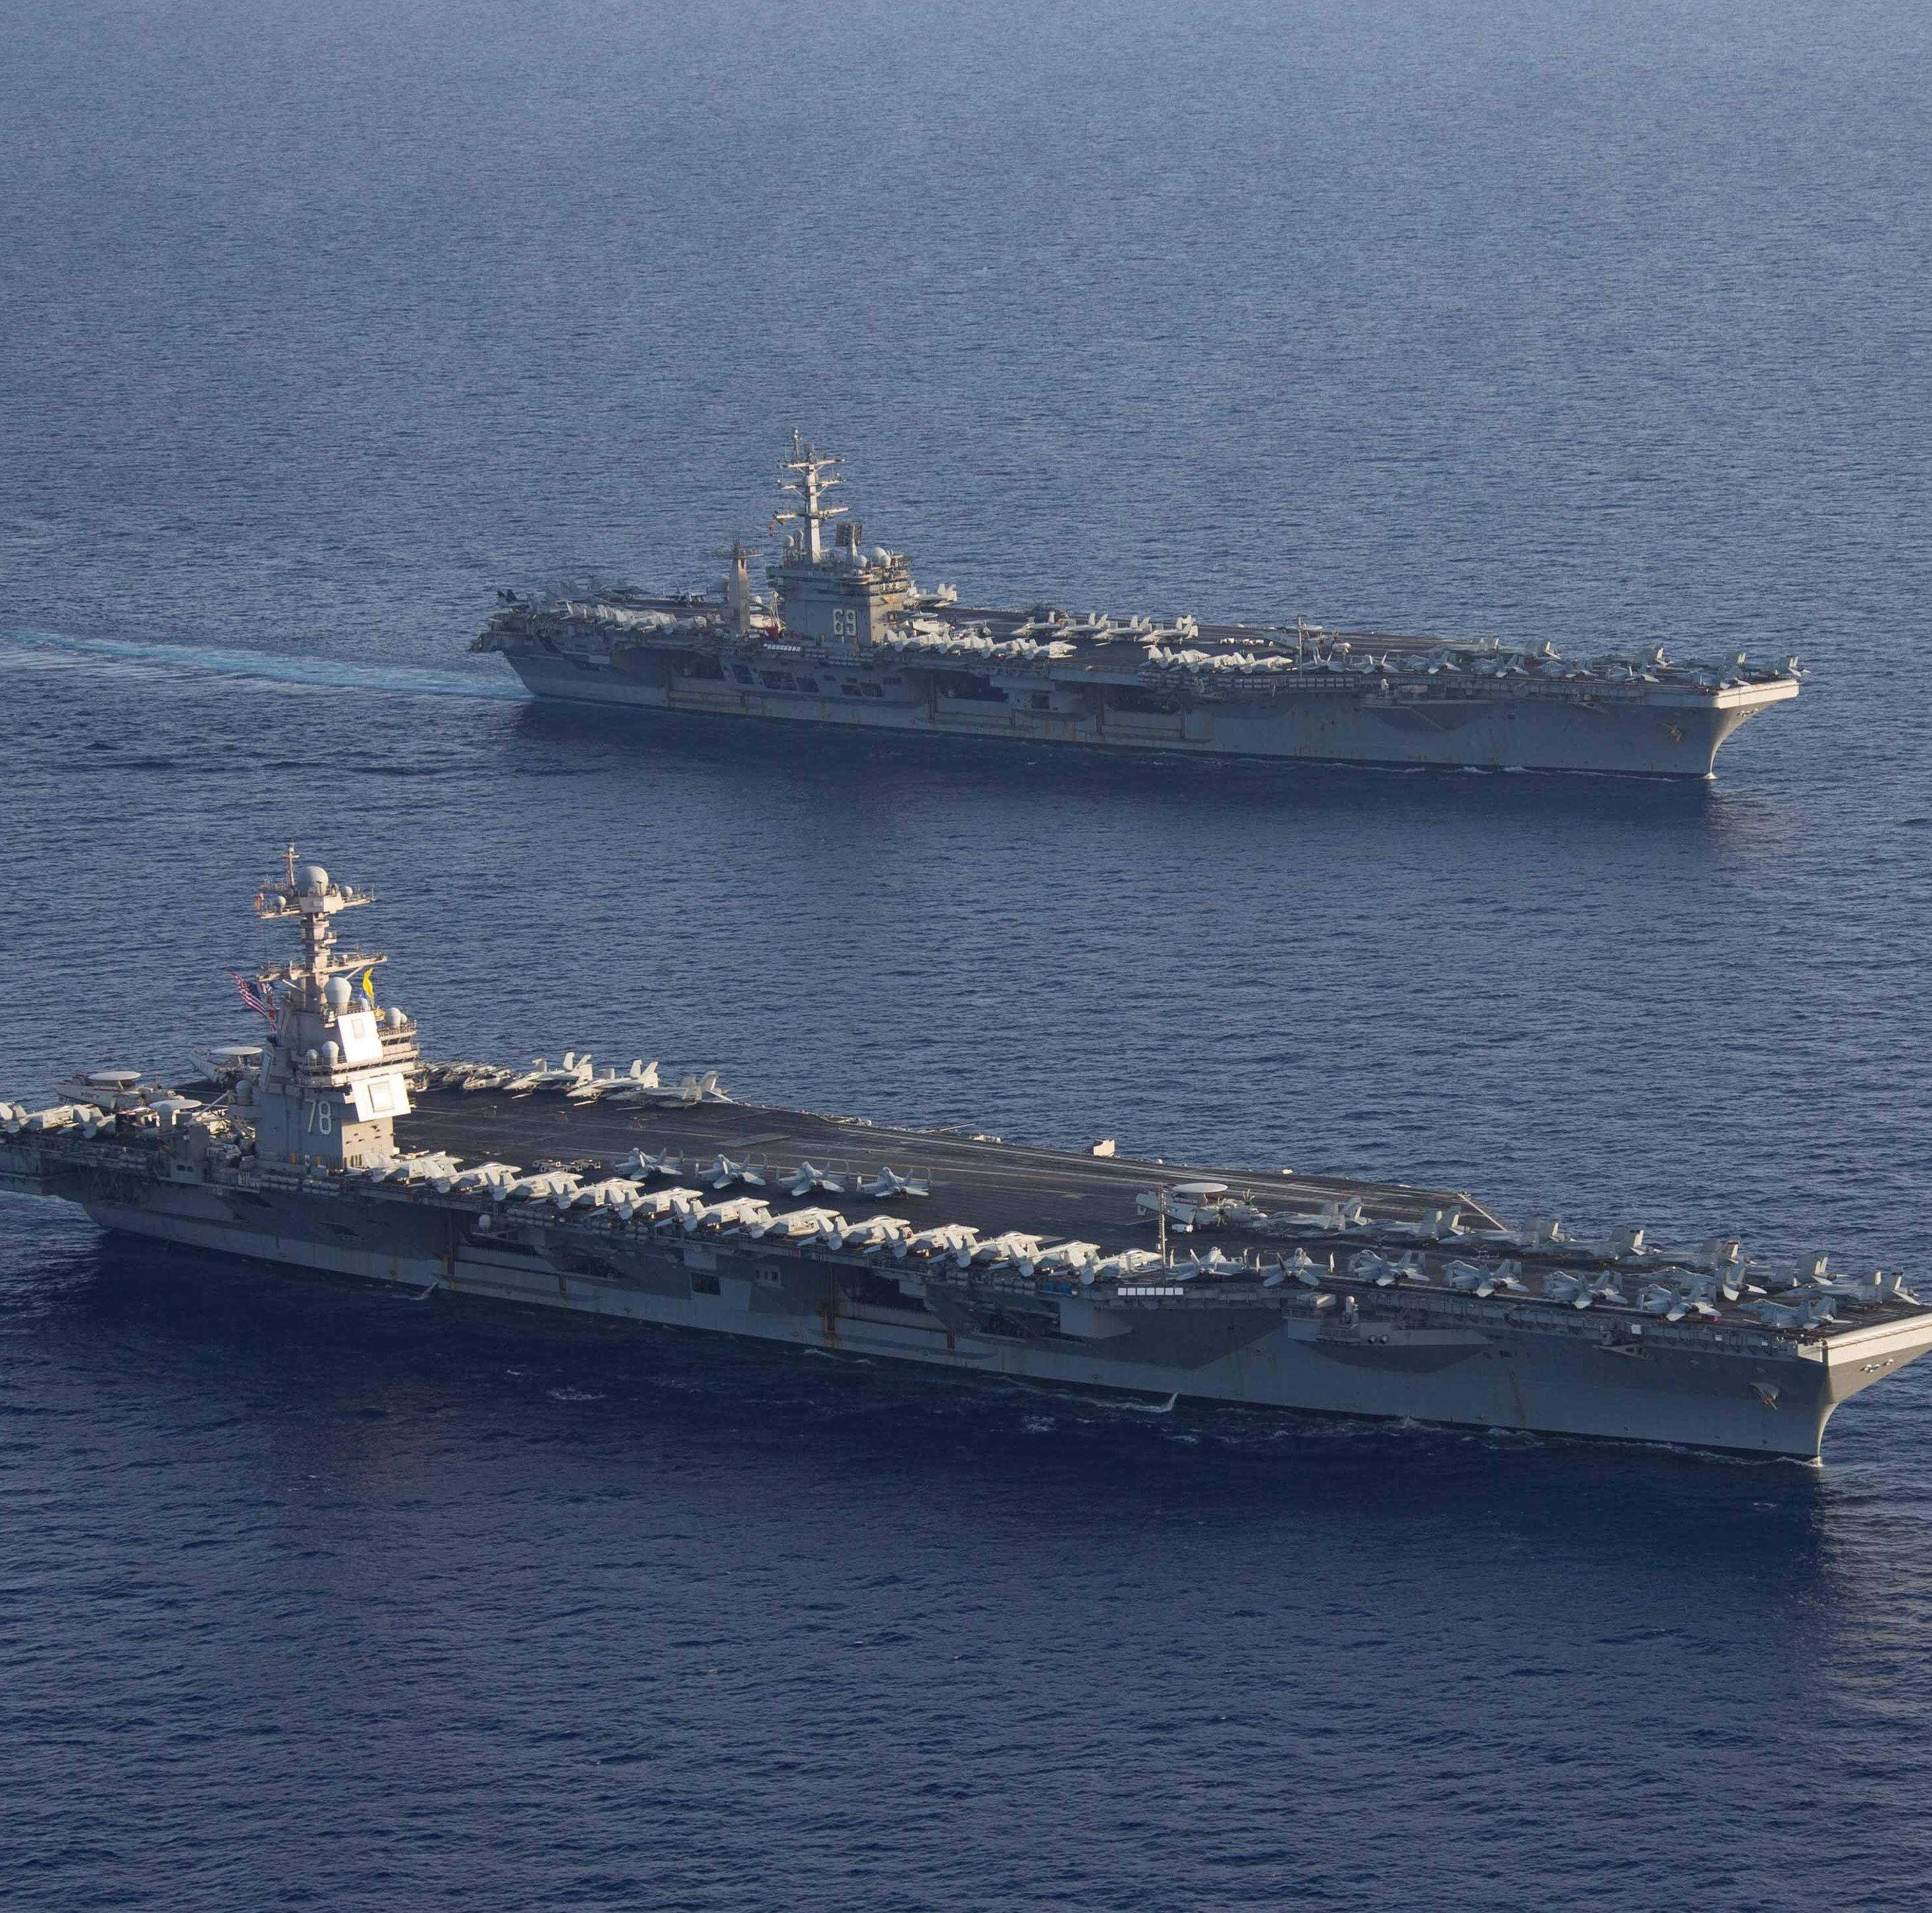 Welp, the United States Might Not Have Enough Aircraft Carriers